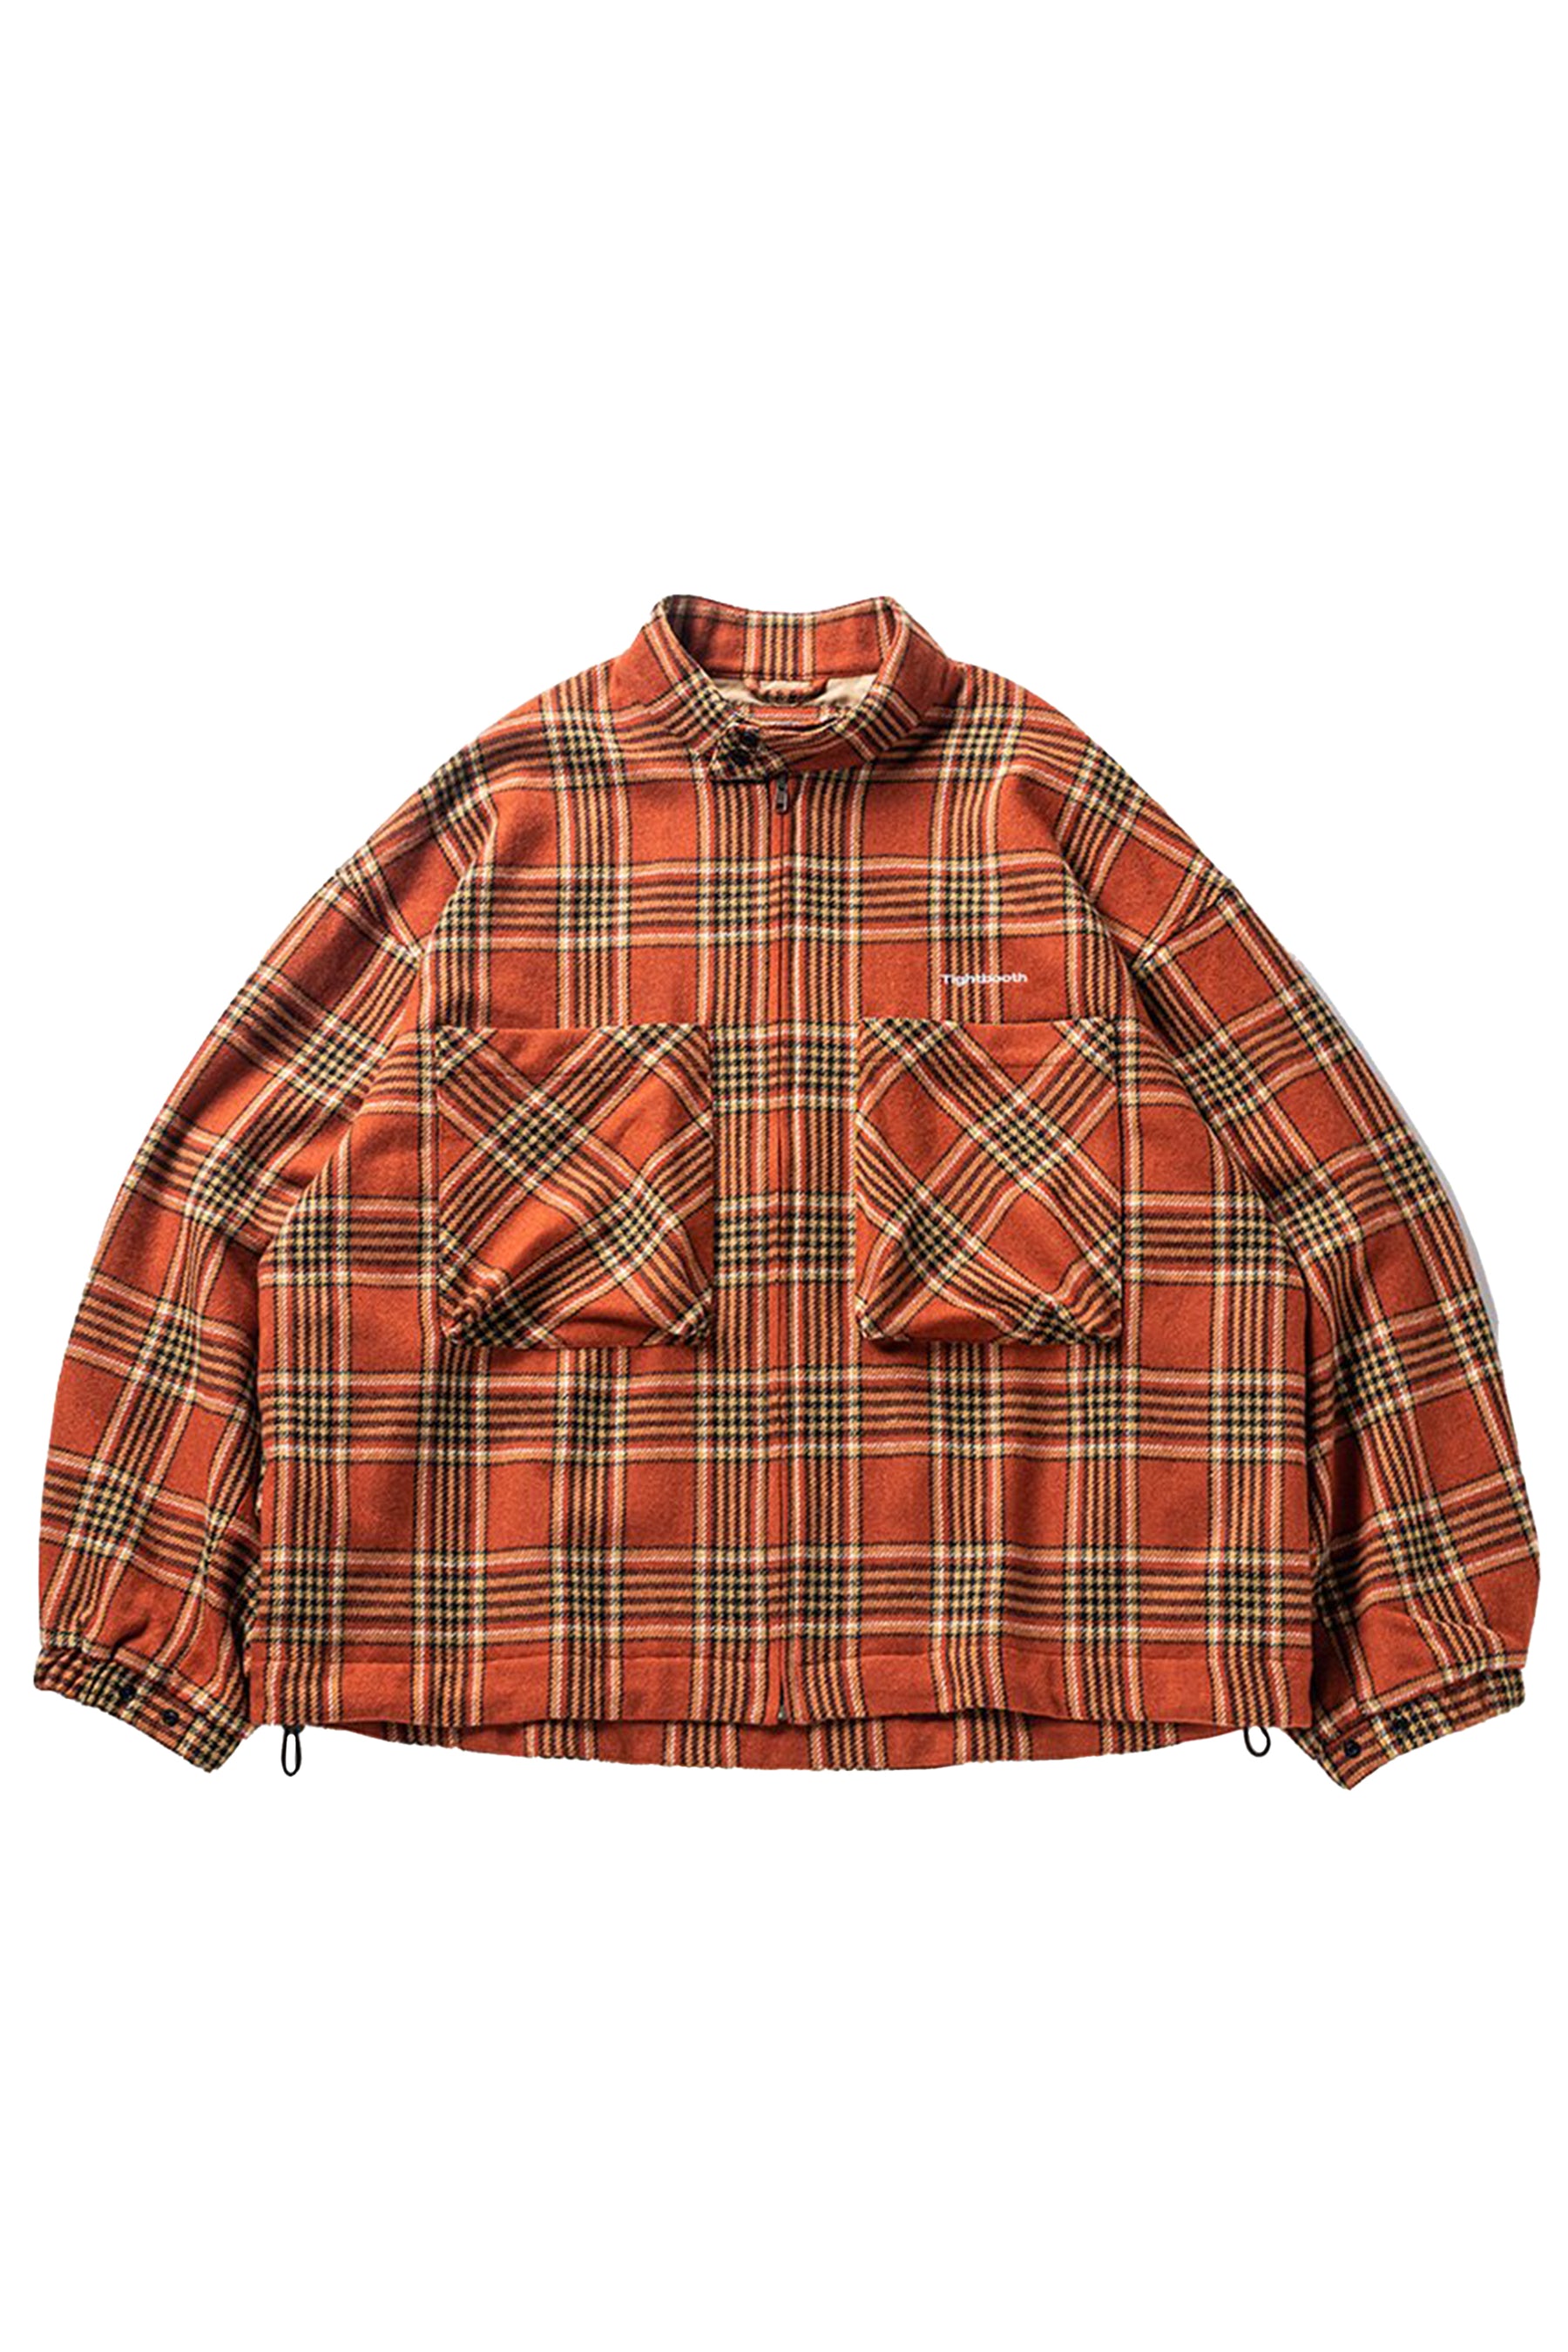 PLAID FLANNEL SWING TOP / ORG